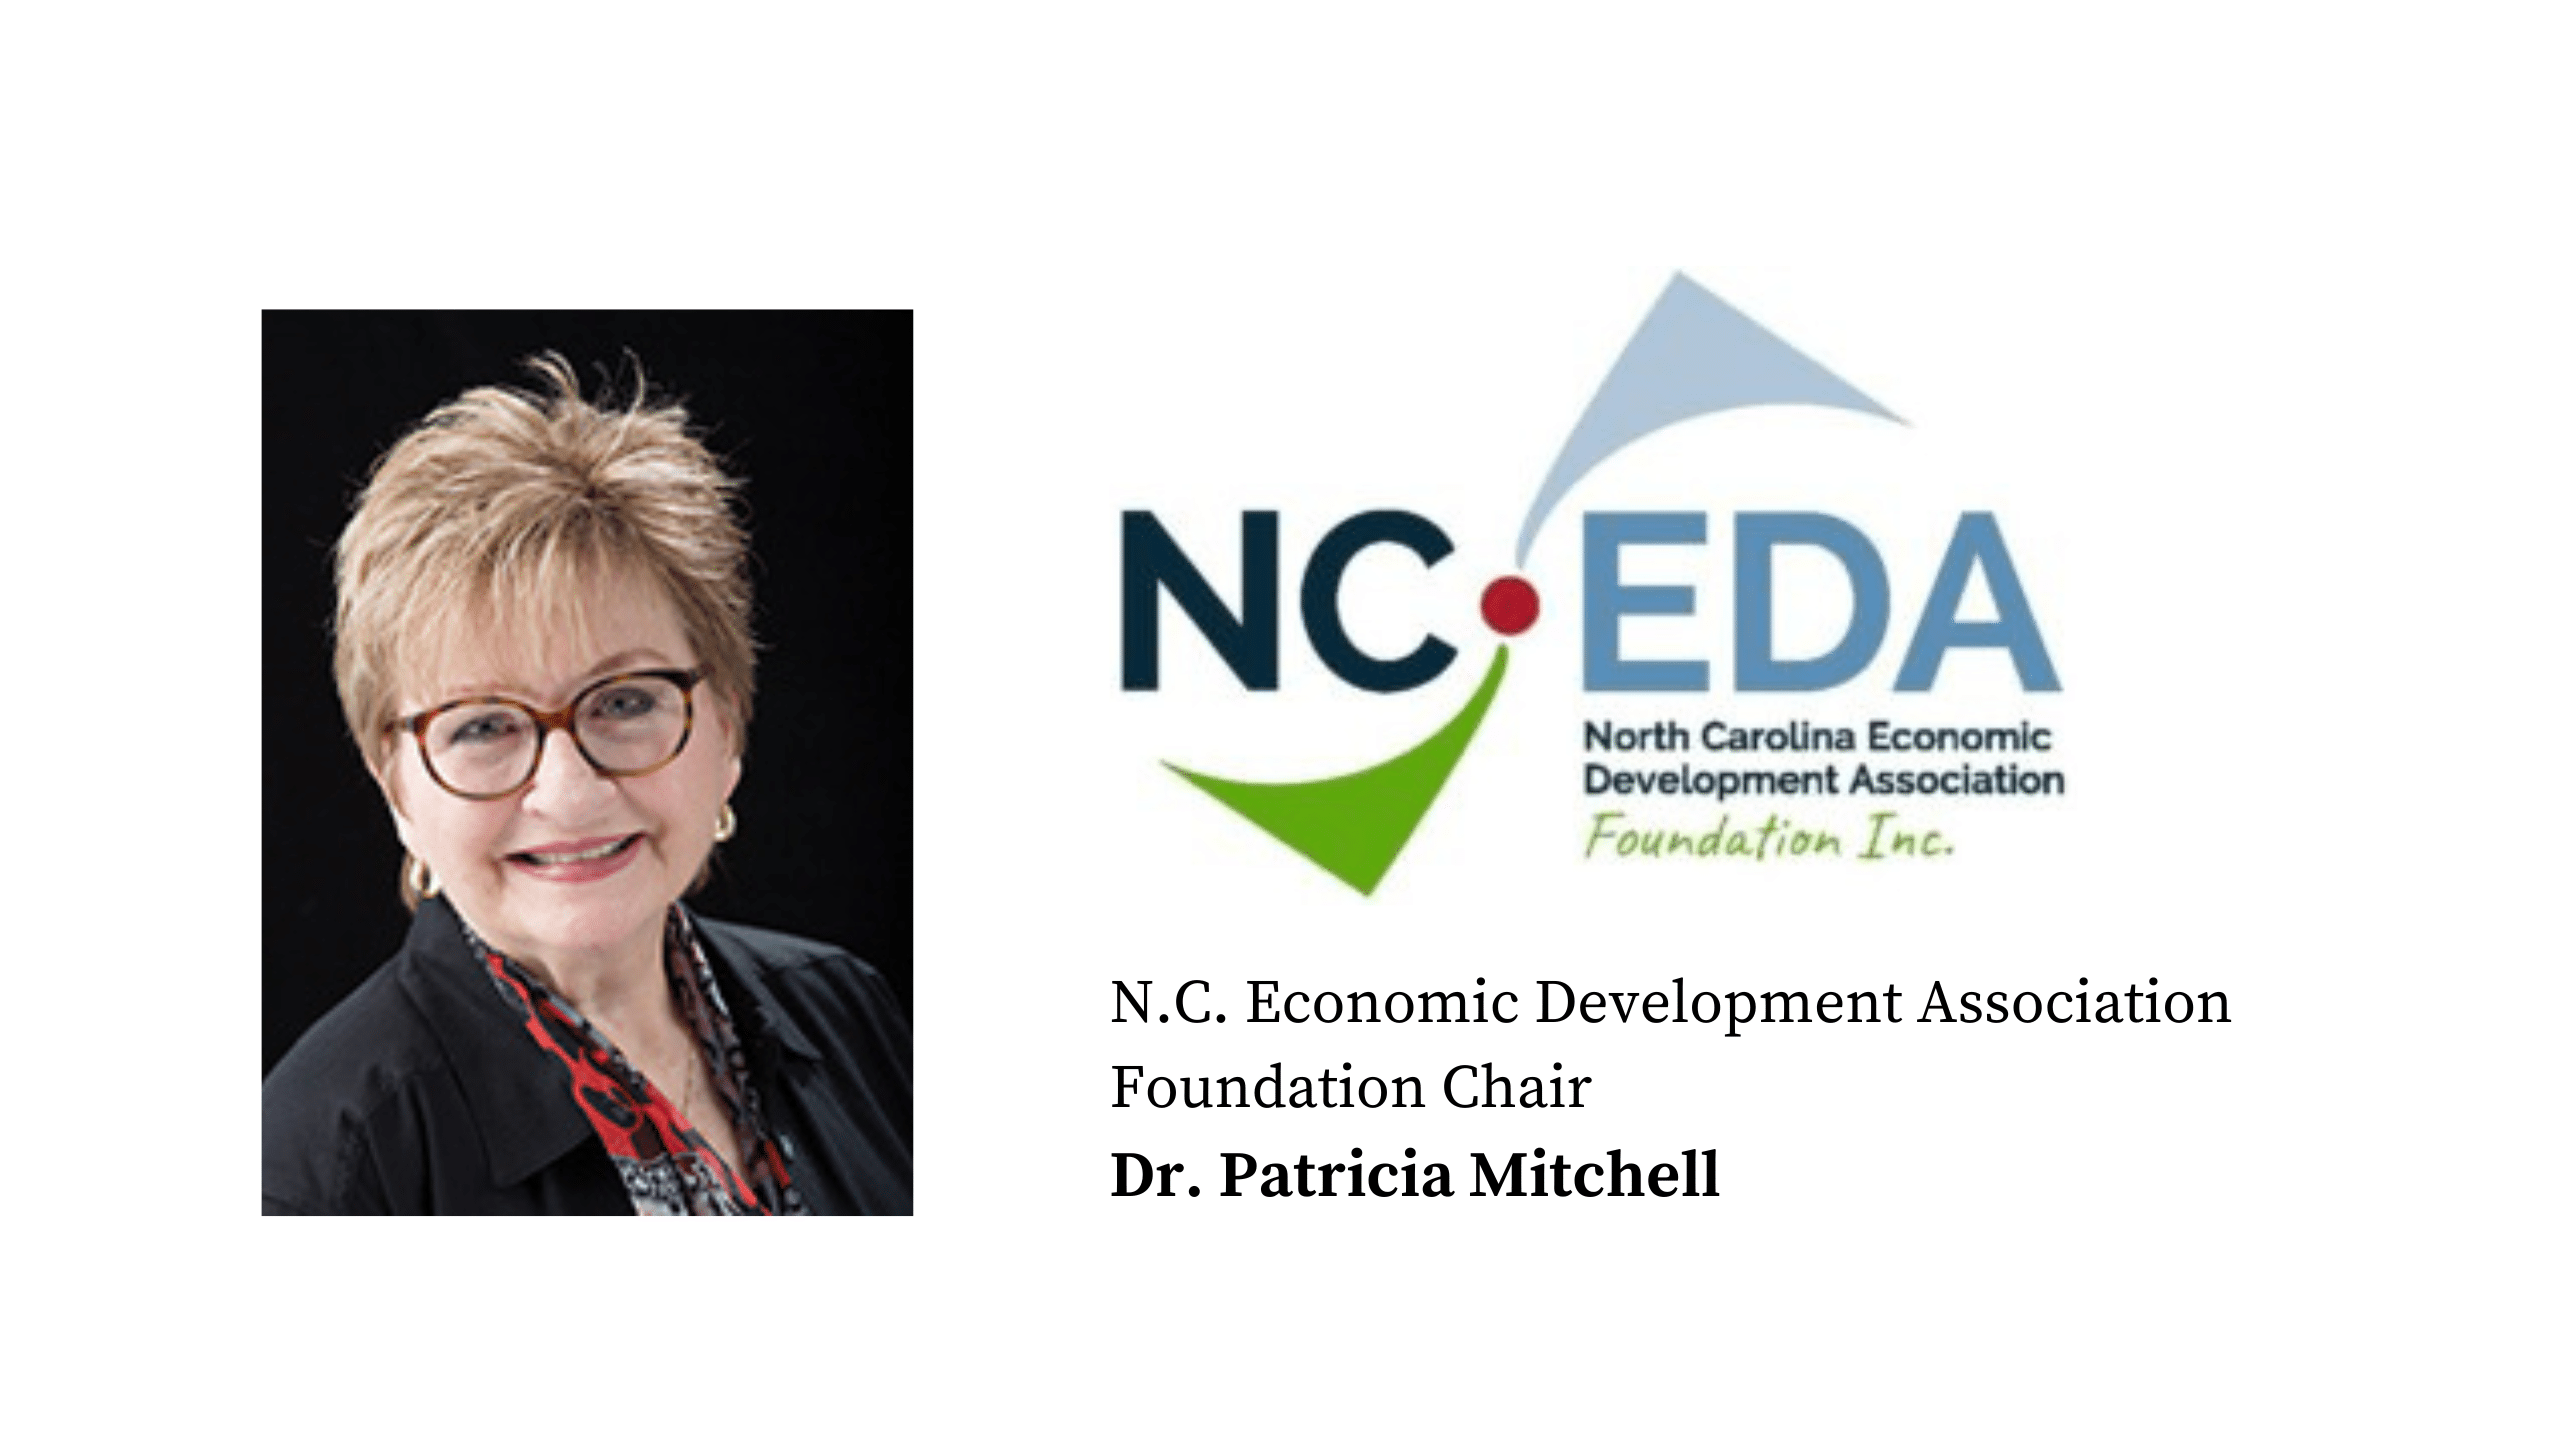 Critical Conversations with Scott T. Hamilton, featuring NCEDA Foundation Chair Dr. Patricia Mitchell